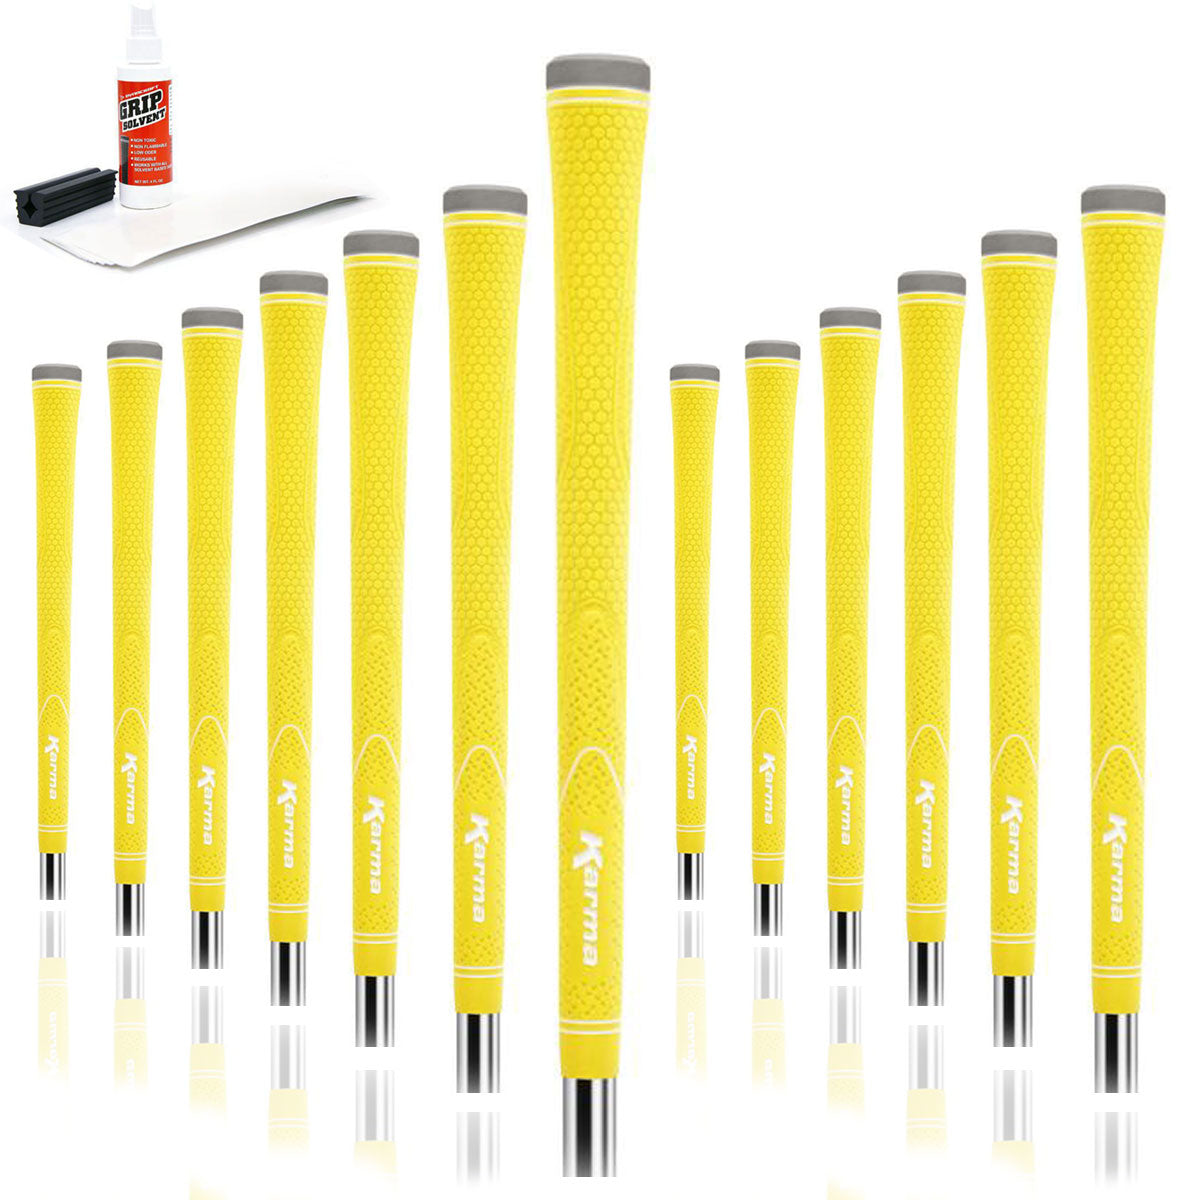 13 Karma Neion II yellow golf grips, golf grip tape strips, bottle of grip solvent and rubber shaft clamp